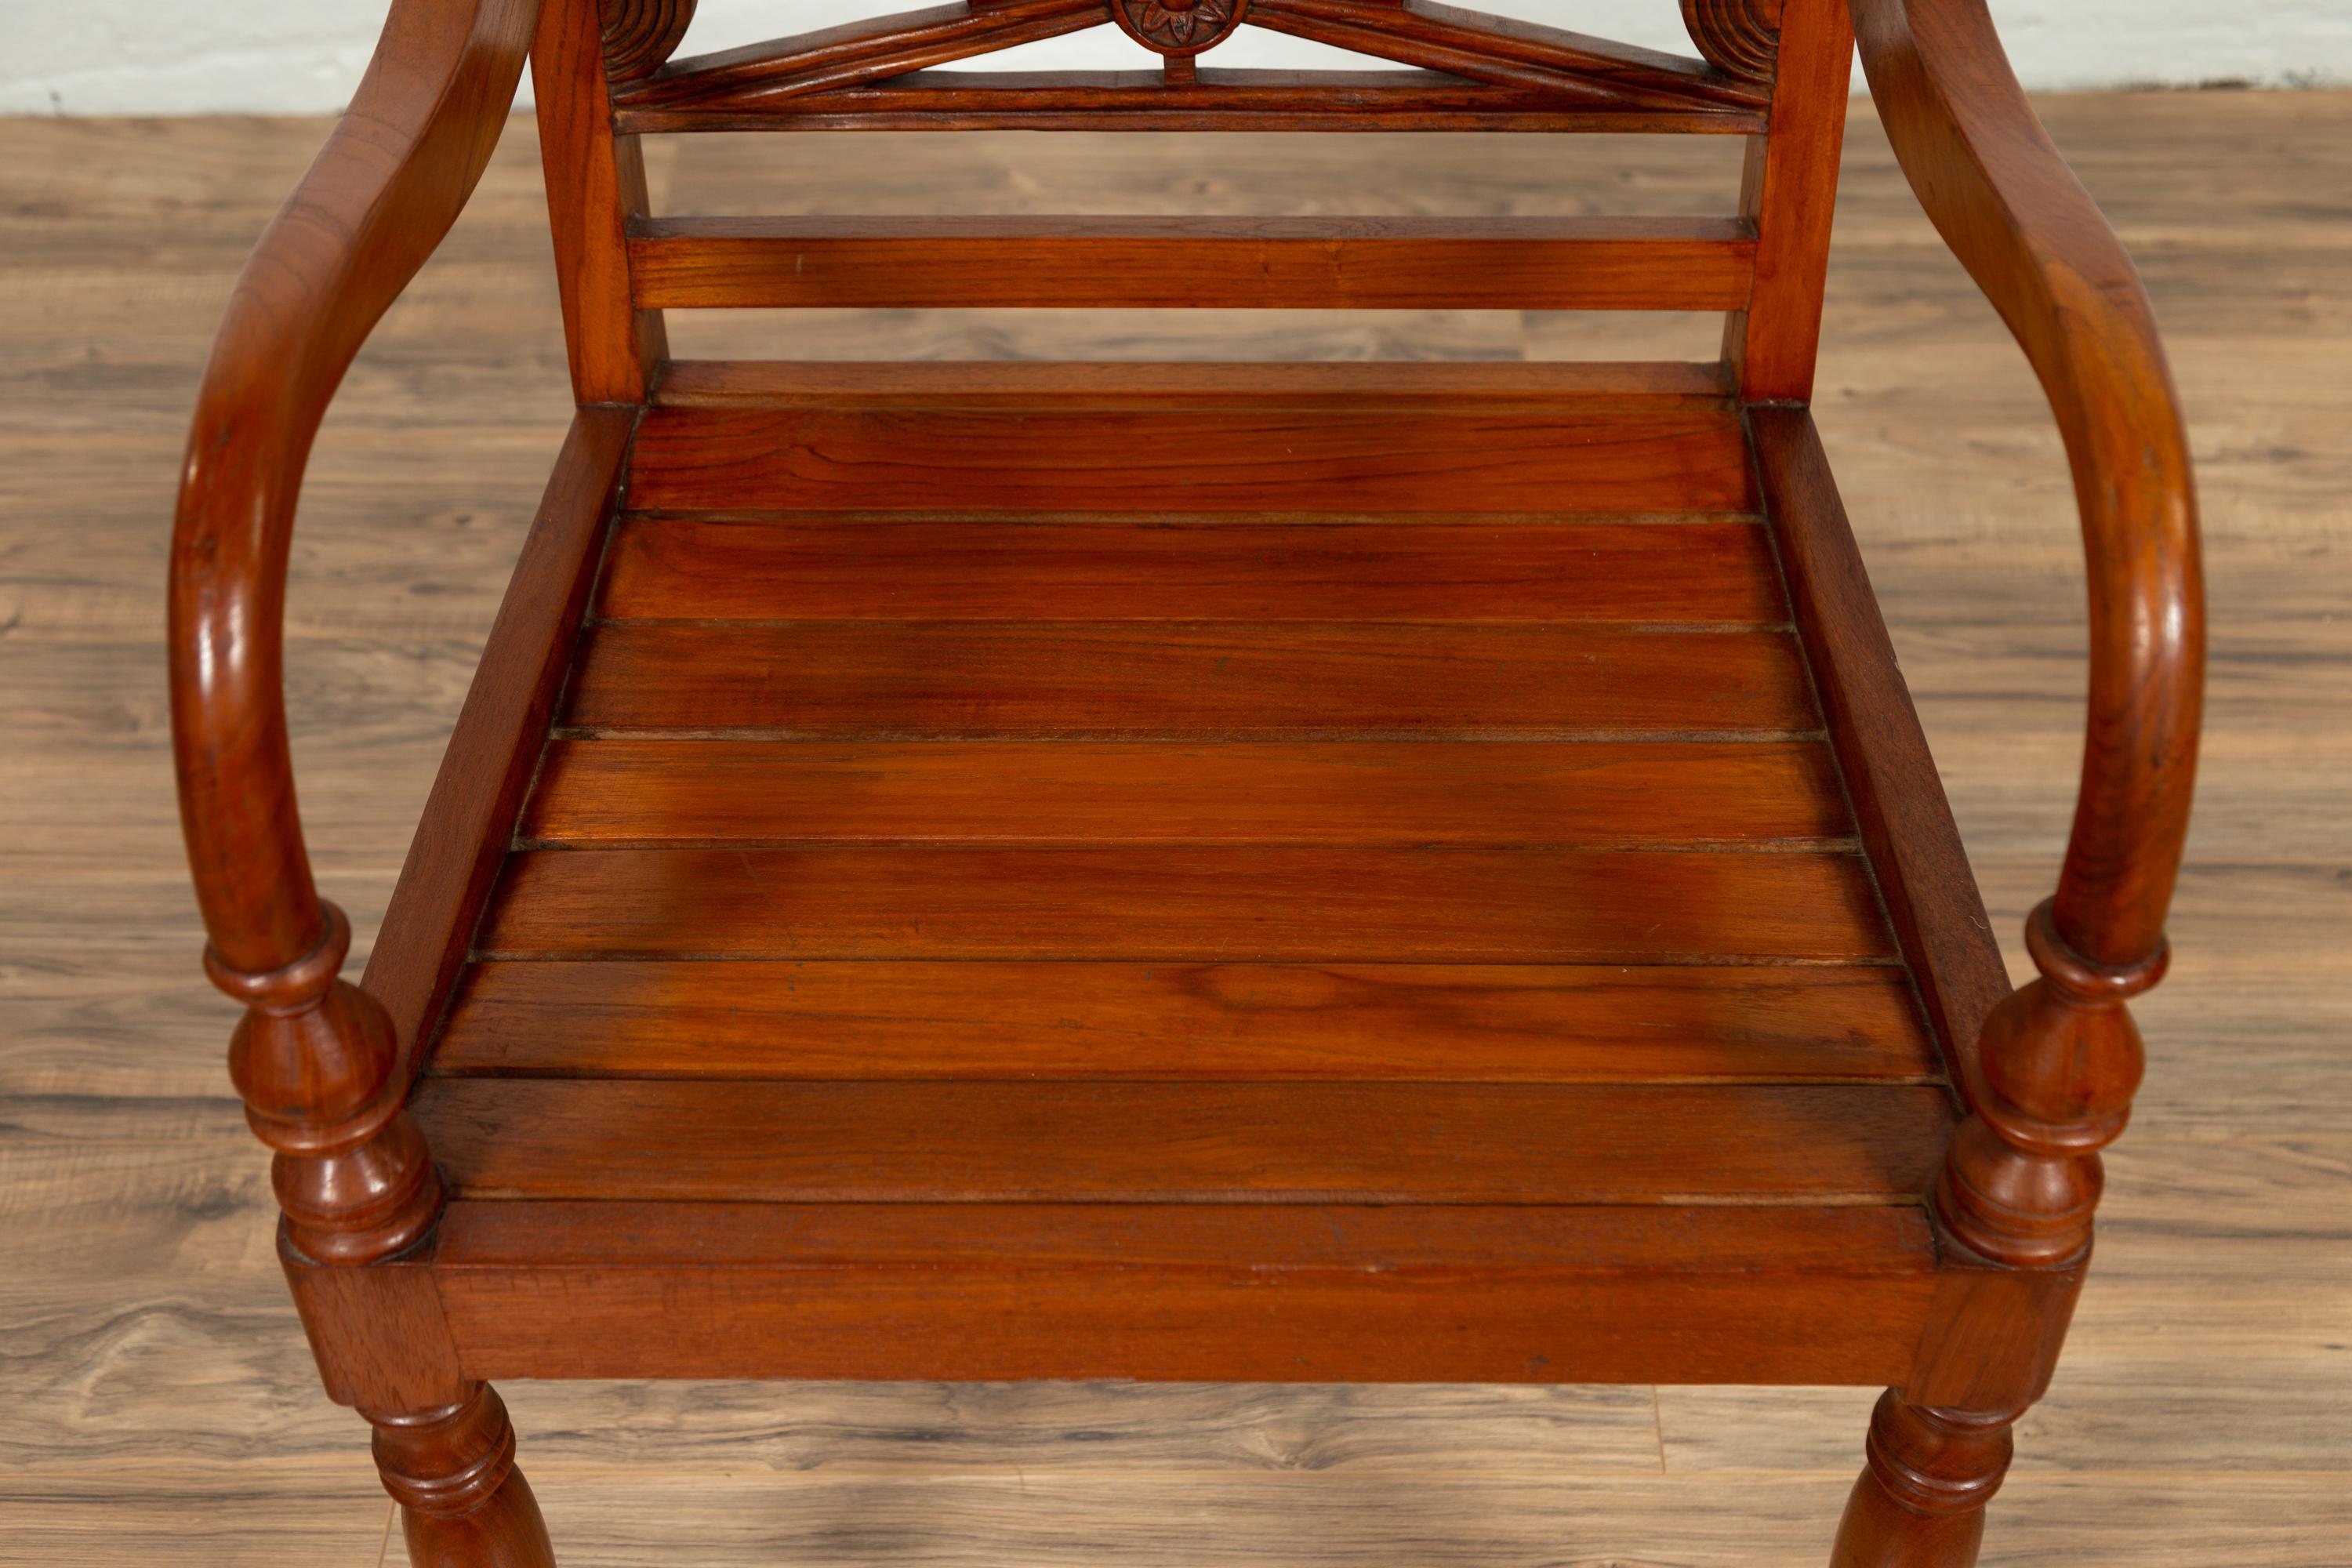 Turned Early 20th Century Captain's Chair from Bali with Slatted Wood and Loop Arms For Sale